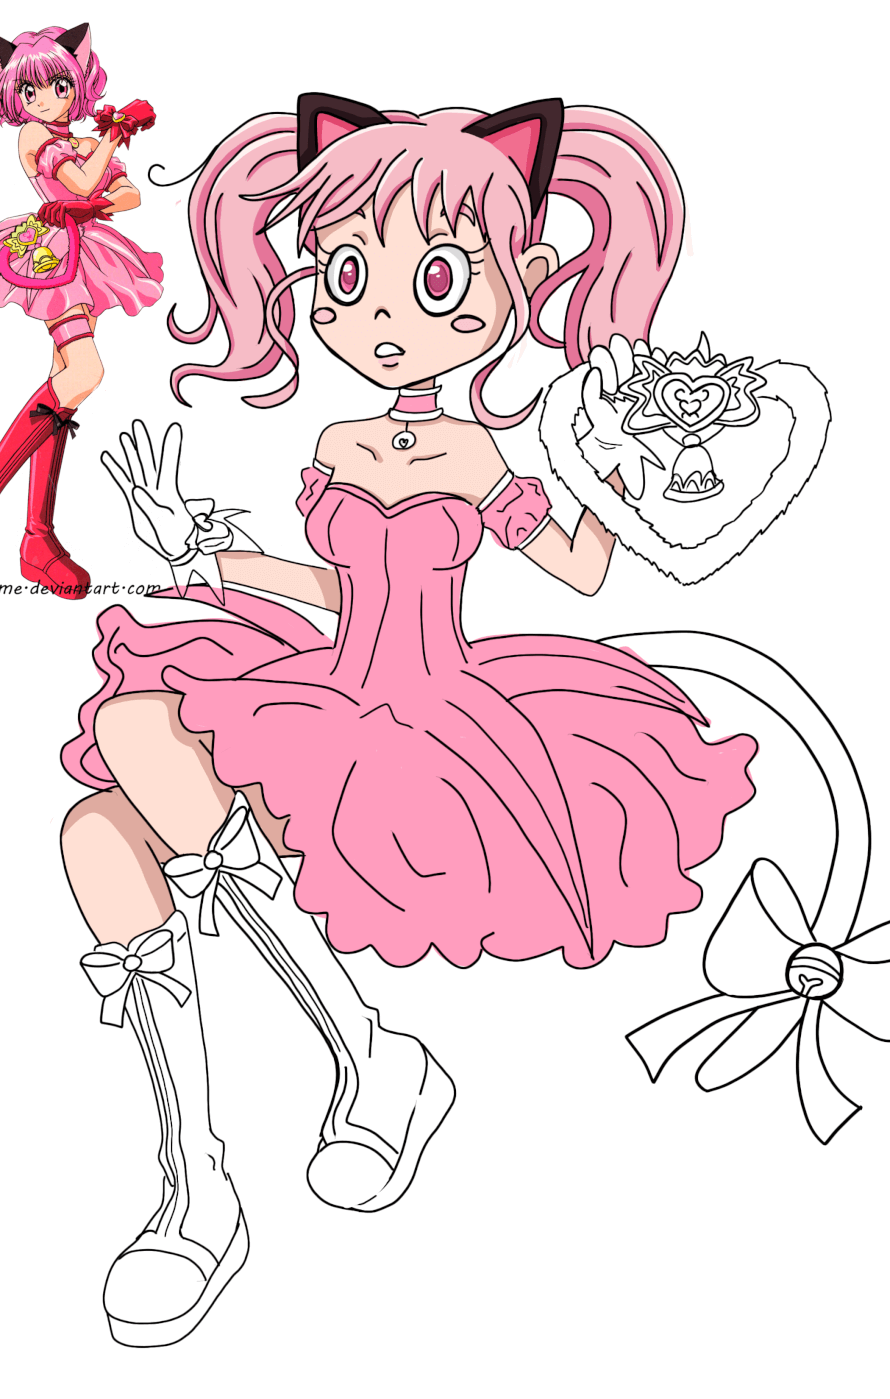 I FINALLY DREW THE WHOLE THING. MEW AYA!

Now how long will it take me to actually color it?...